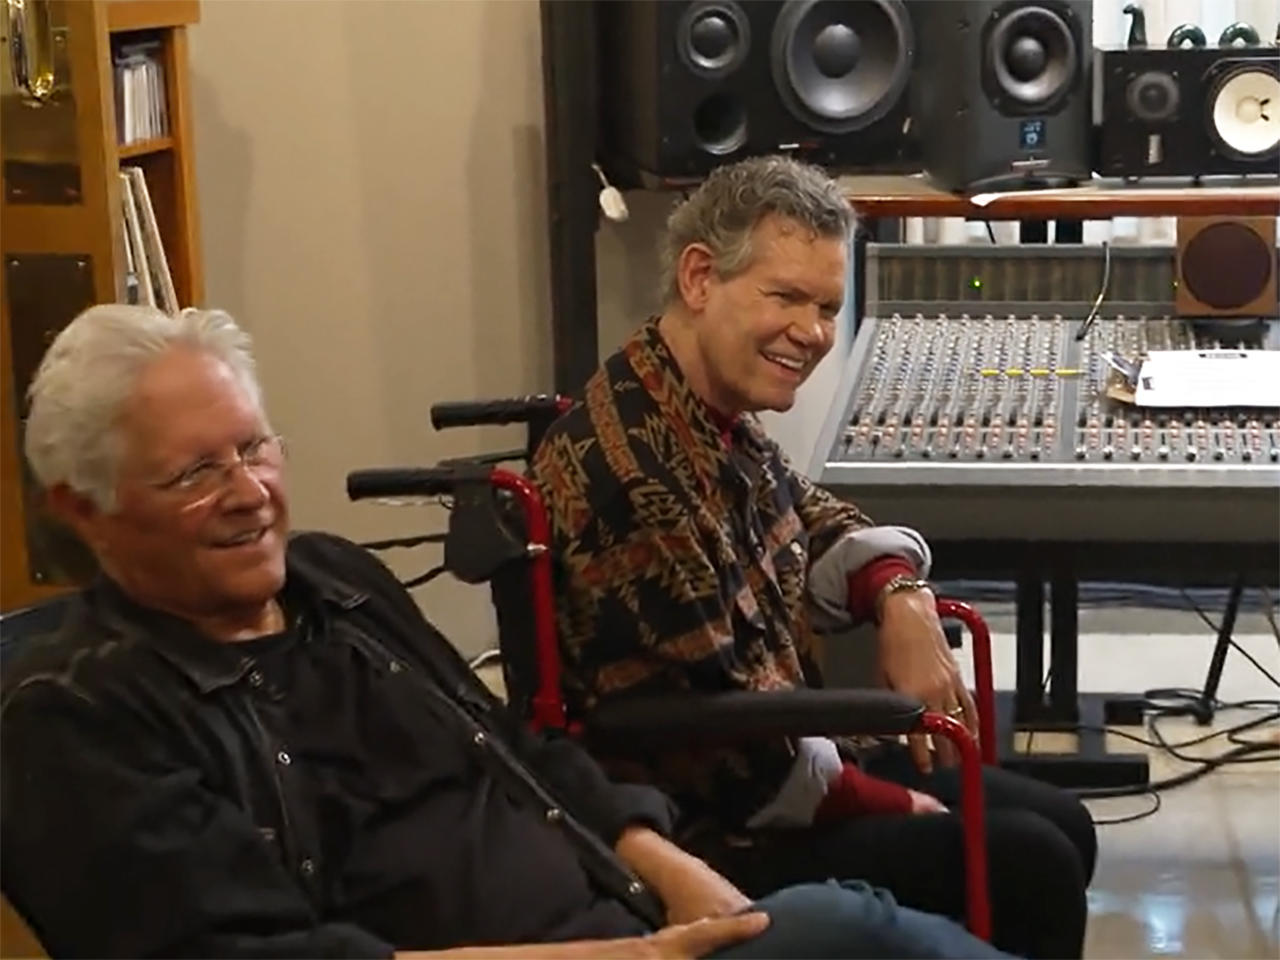 an exclusive look inside the making of singer randy travis' new ai-created song